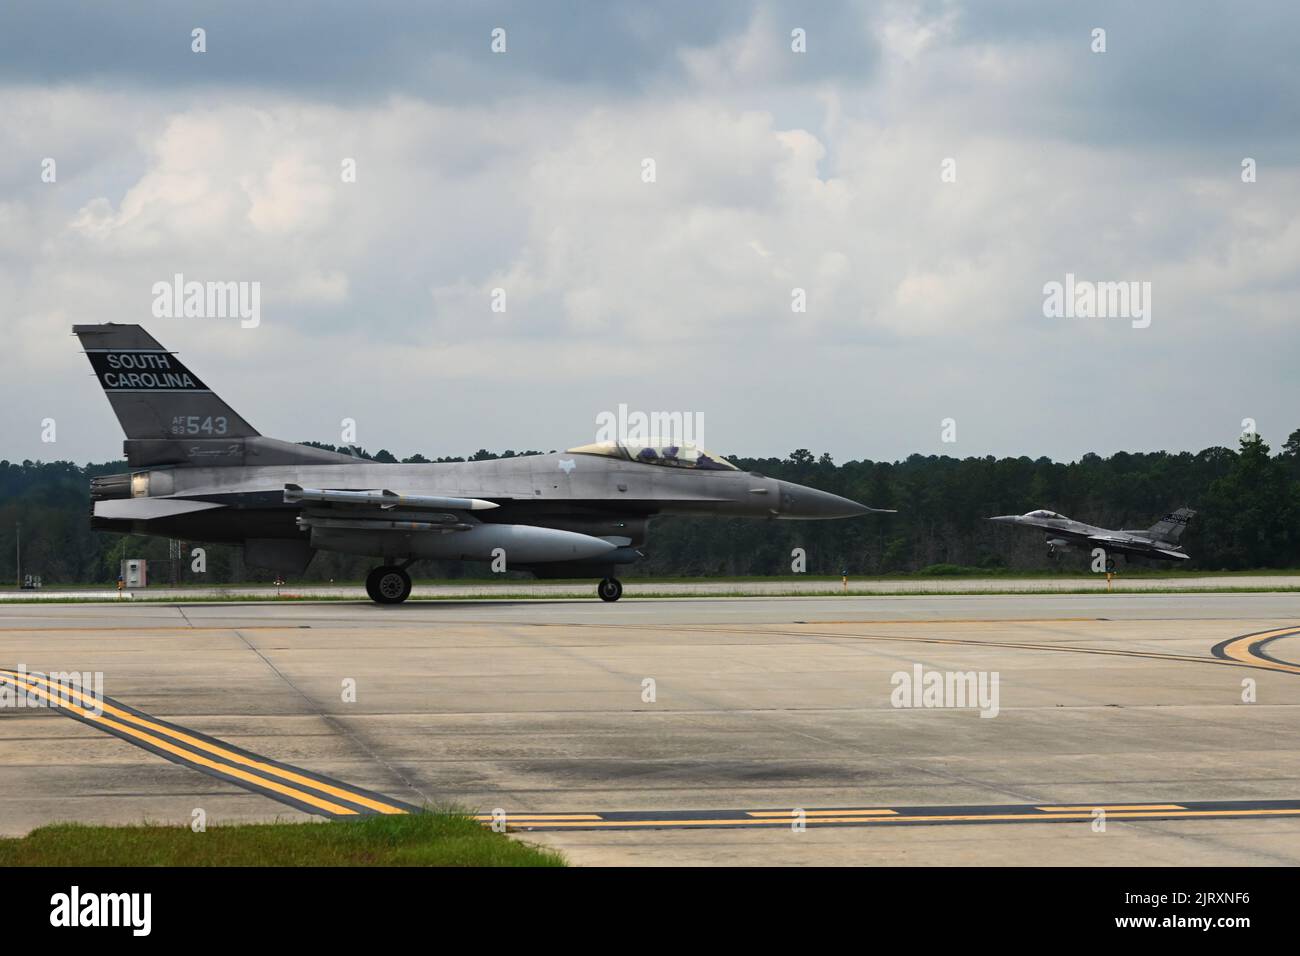 U.S. Air Force F-16 fighter jets assigned to the 169th Fighter Wing from McEntire Joint National Guard Base, South Carolina, touch down and taxi back after conducting routine training flights at the Columbia Metropolitan Airport, South Carolina, August 24, 2022. The 169th Fighter Wing is temporarily flying out of the Columbia Metropolitan Airport while the McEntire Joint National Guard Base runway undergoes construction. (U.S. Air National Guard photo by Airman 1st Class Danielle Dawson) Stock Photo